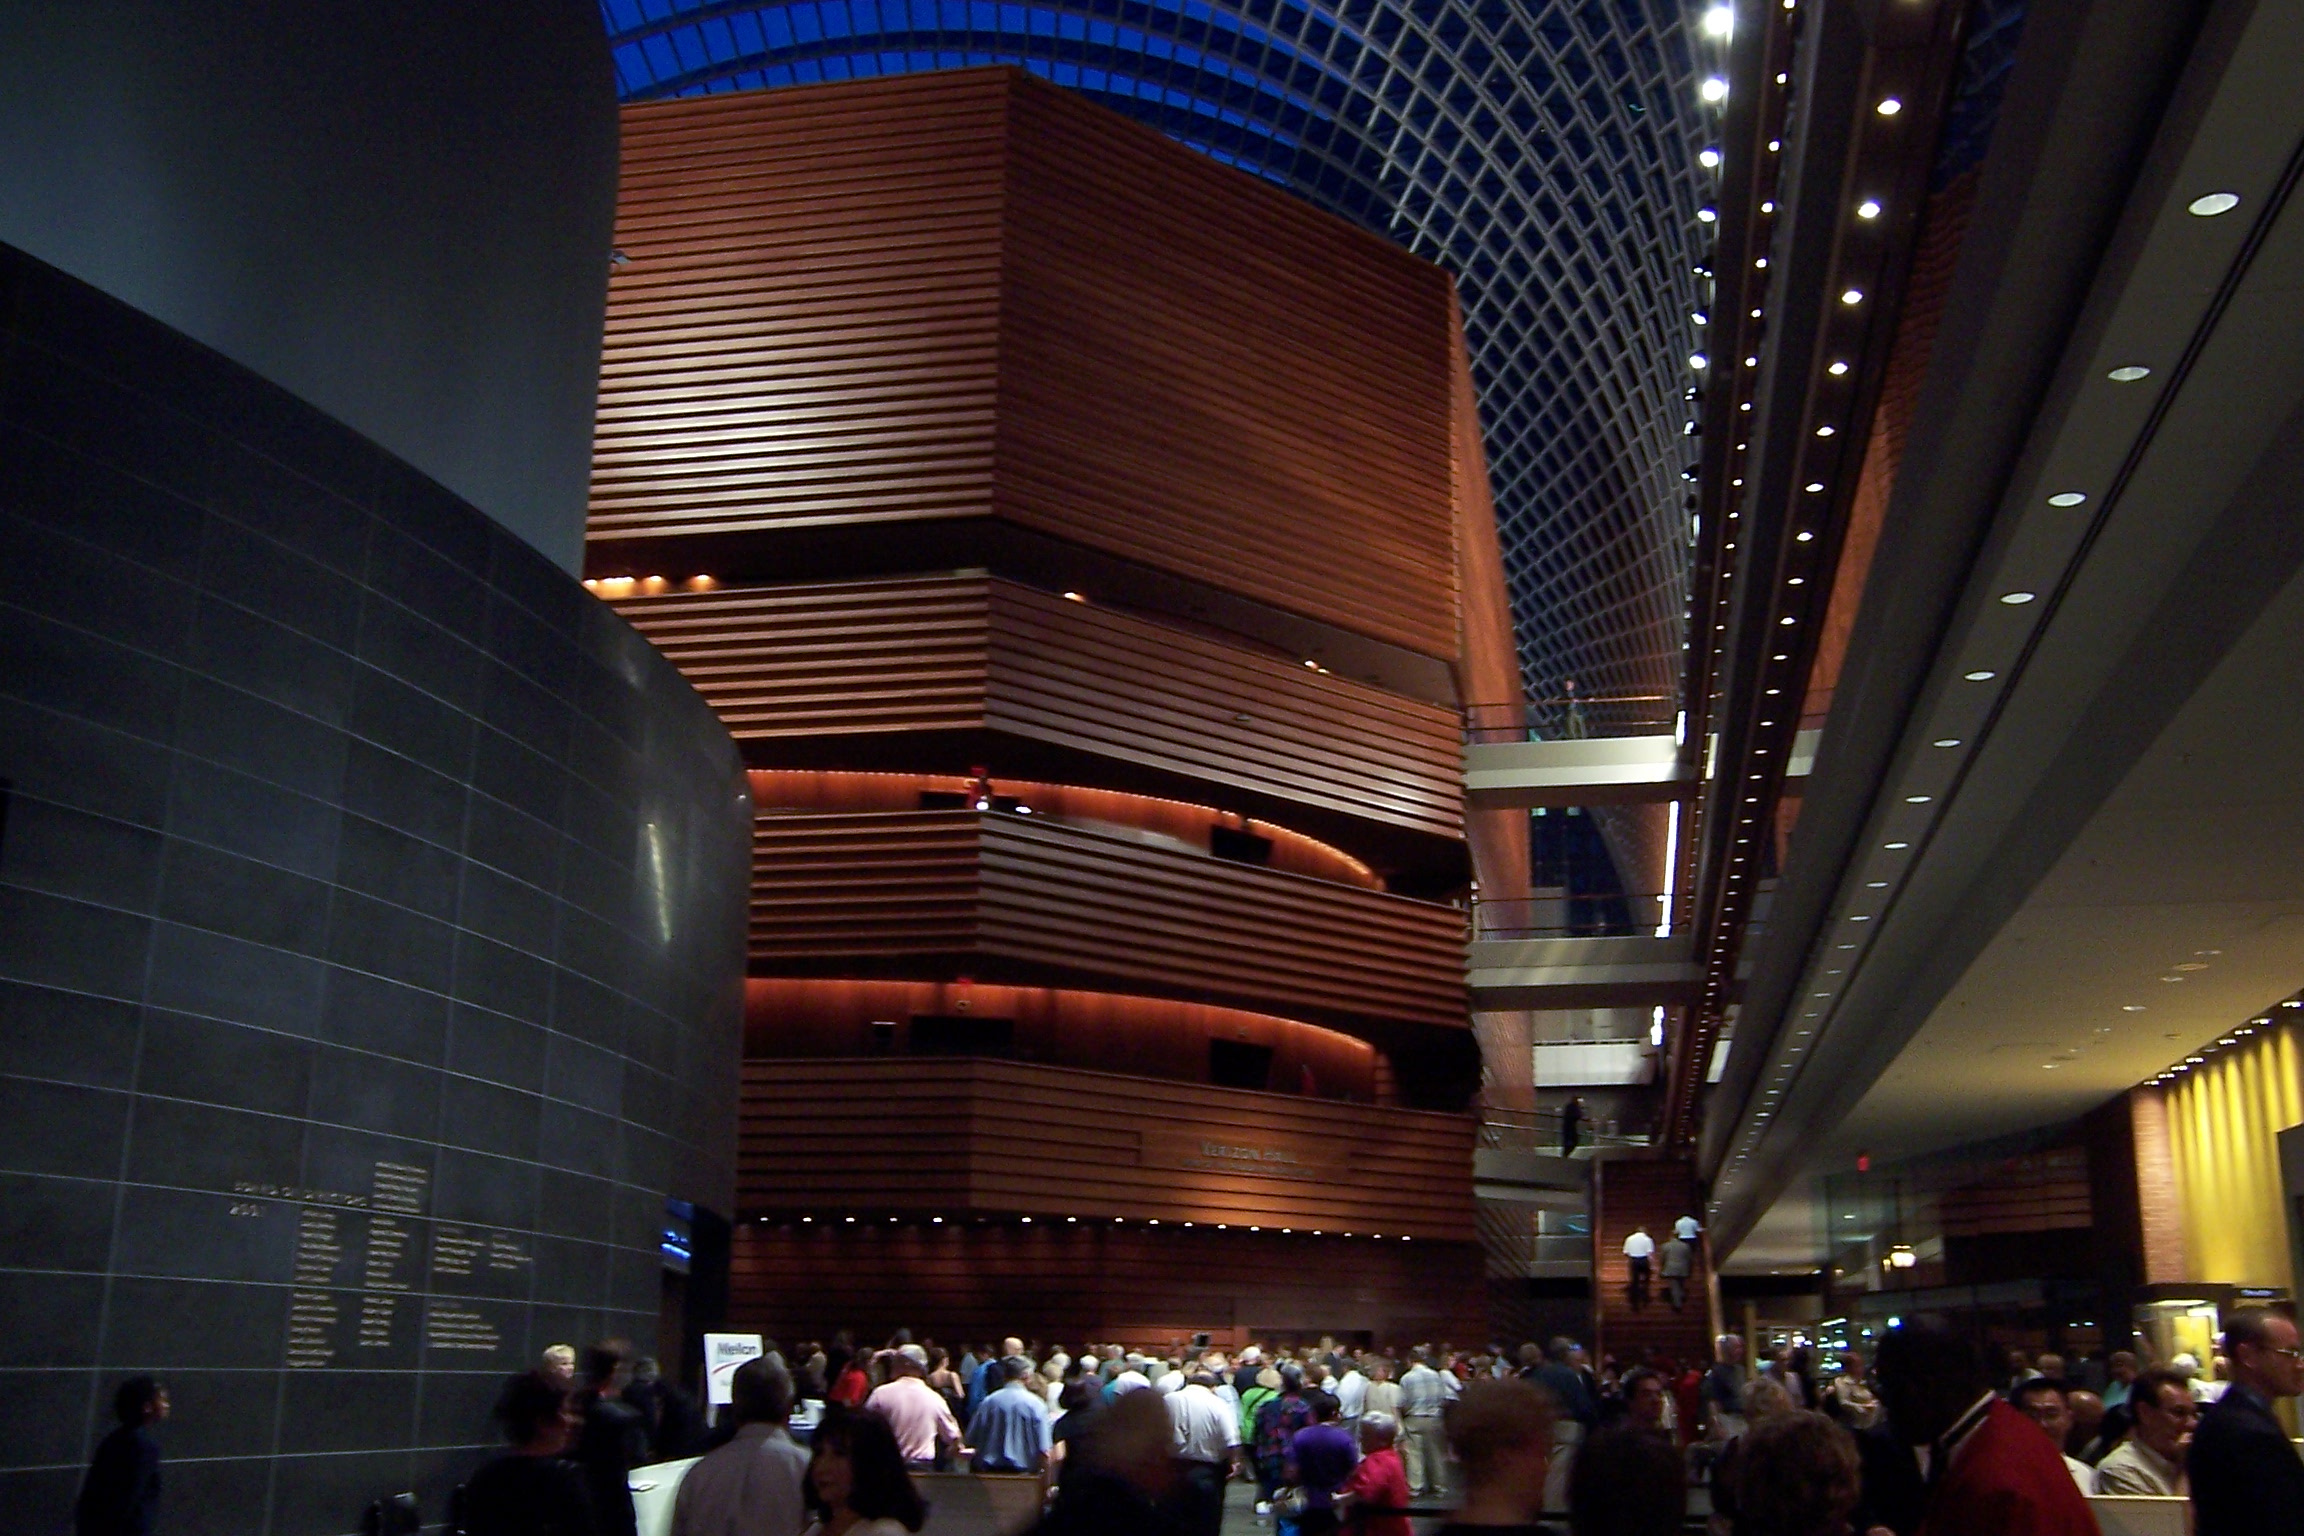 thumbKimmel Center for the Performing Arts at 300 South Broad Street